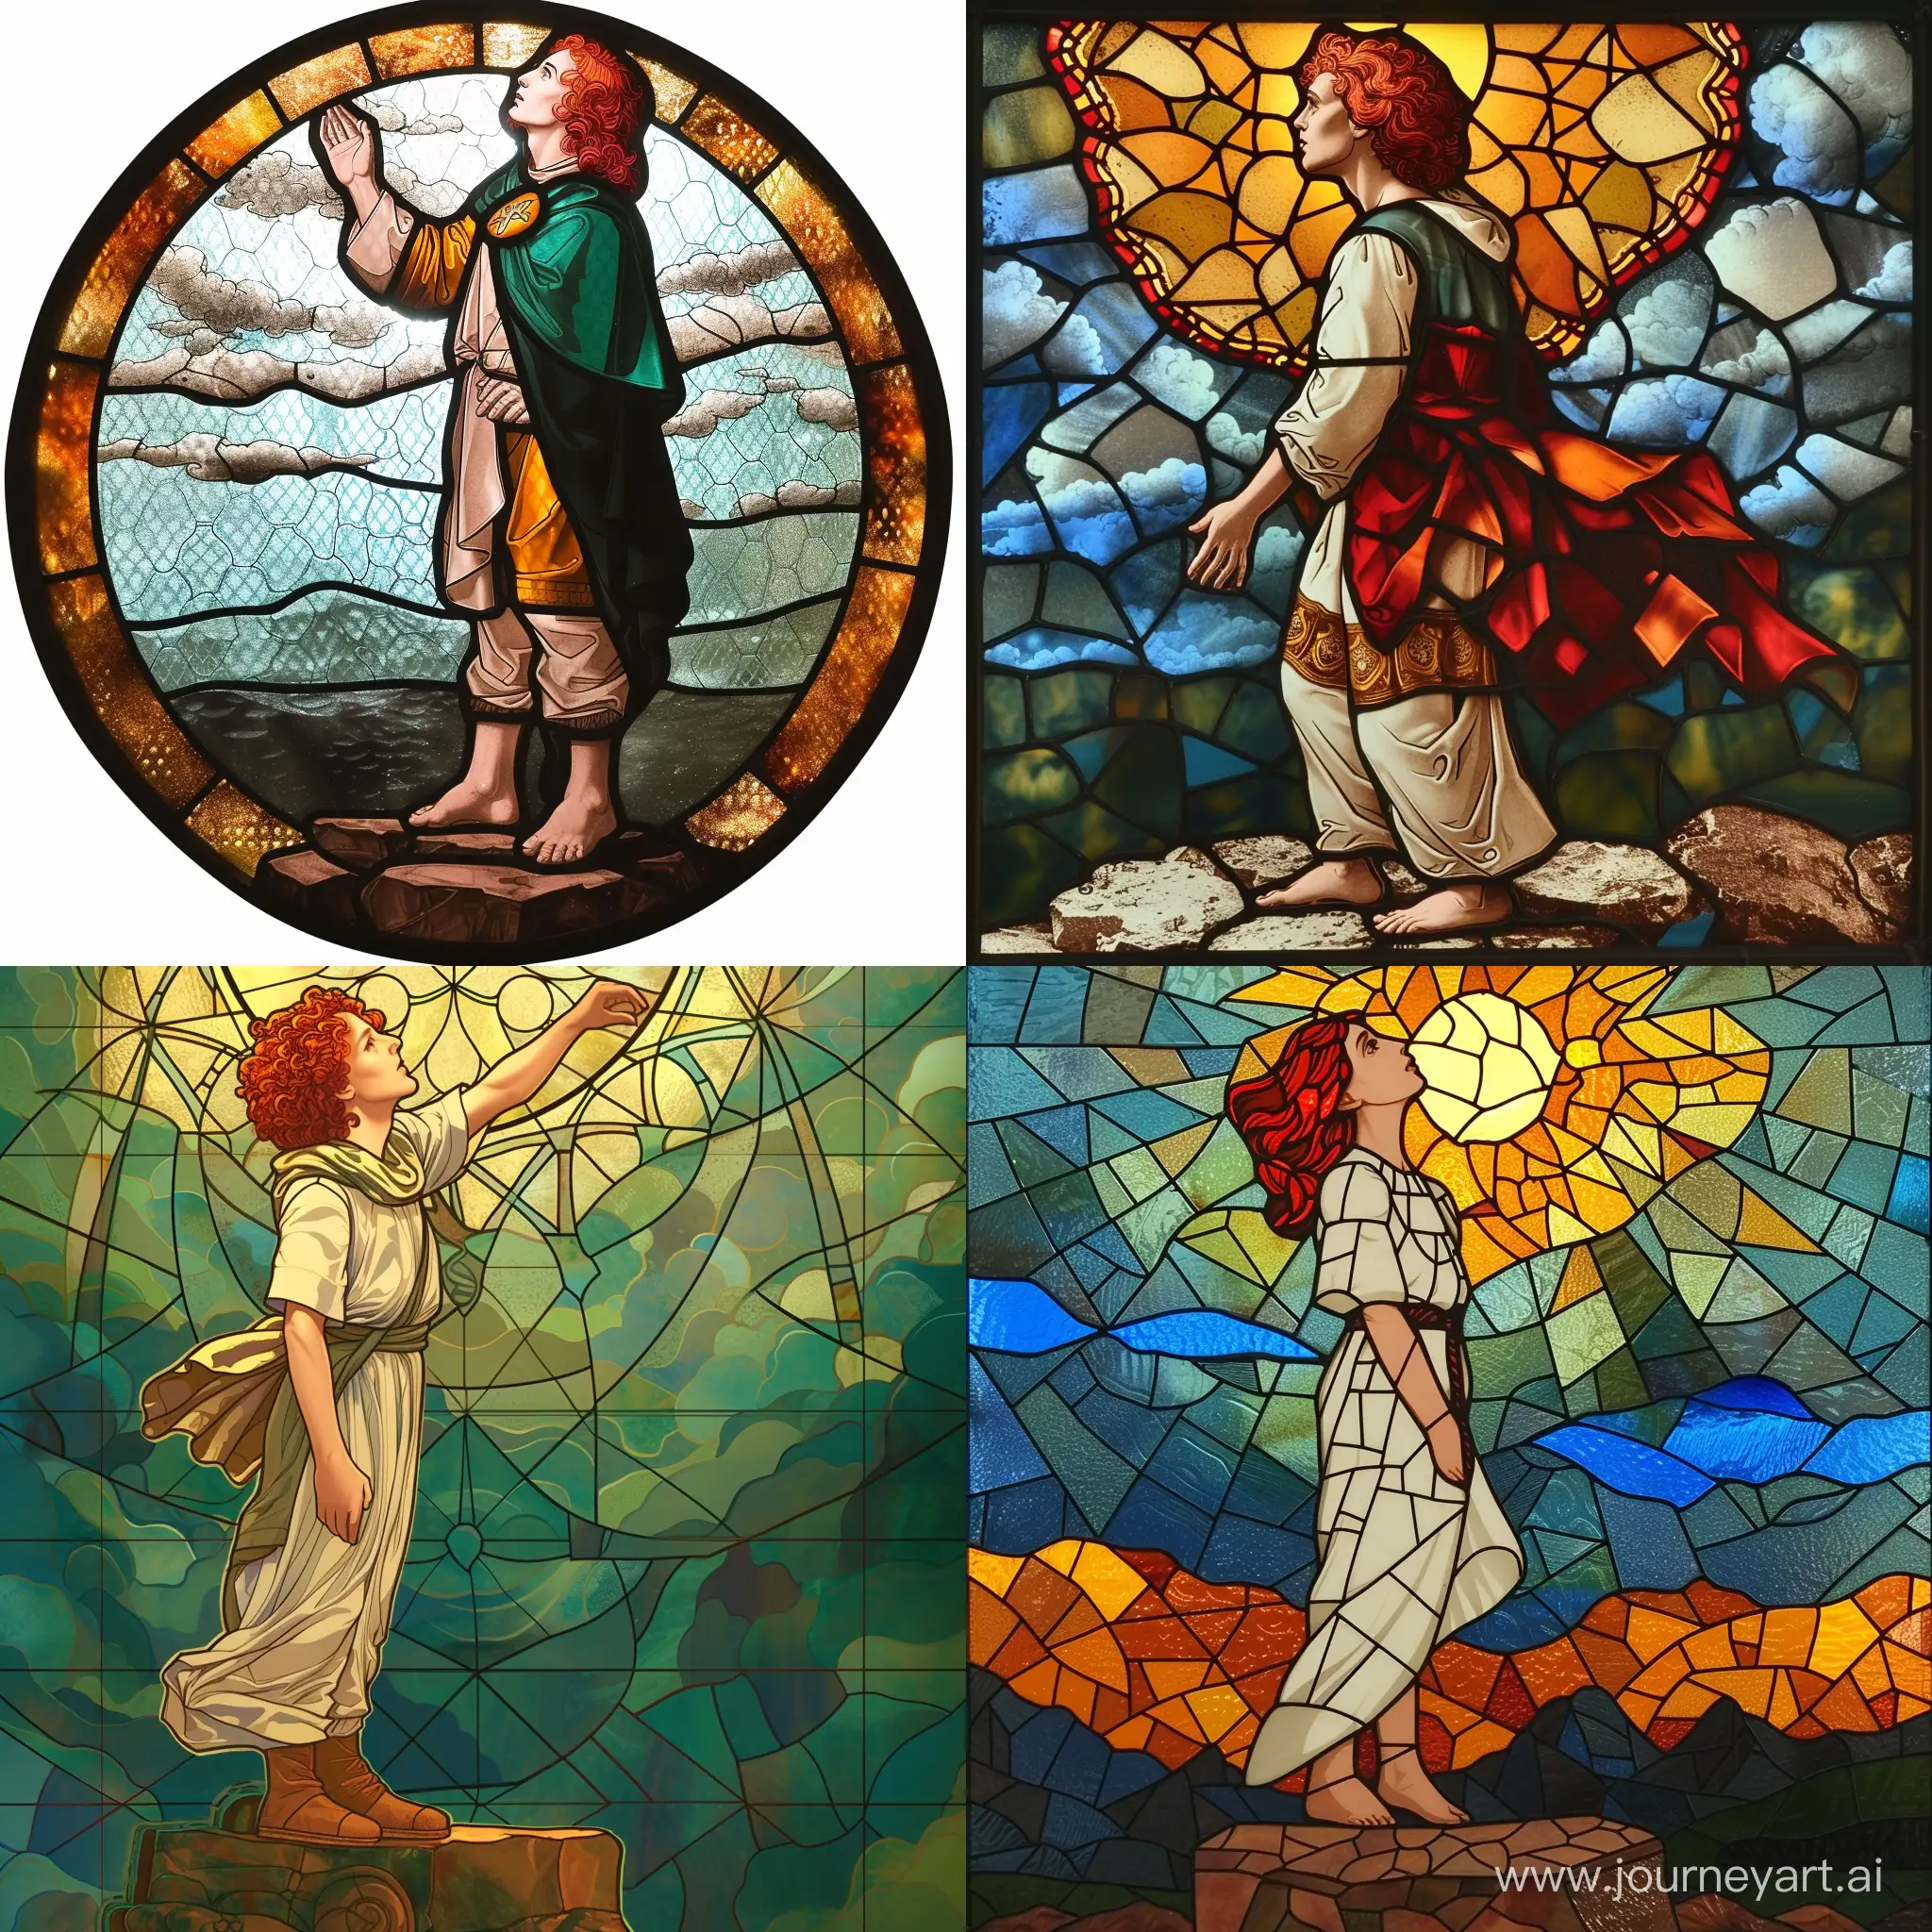 RedHaired-Christian-Saint-Gazing-at-the-Sky-on-Stone-Platform-with-Stained-Glass-Background